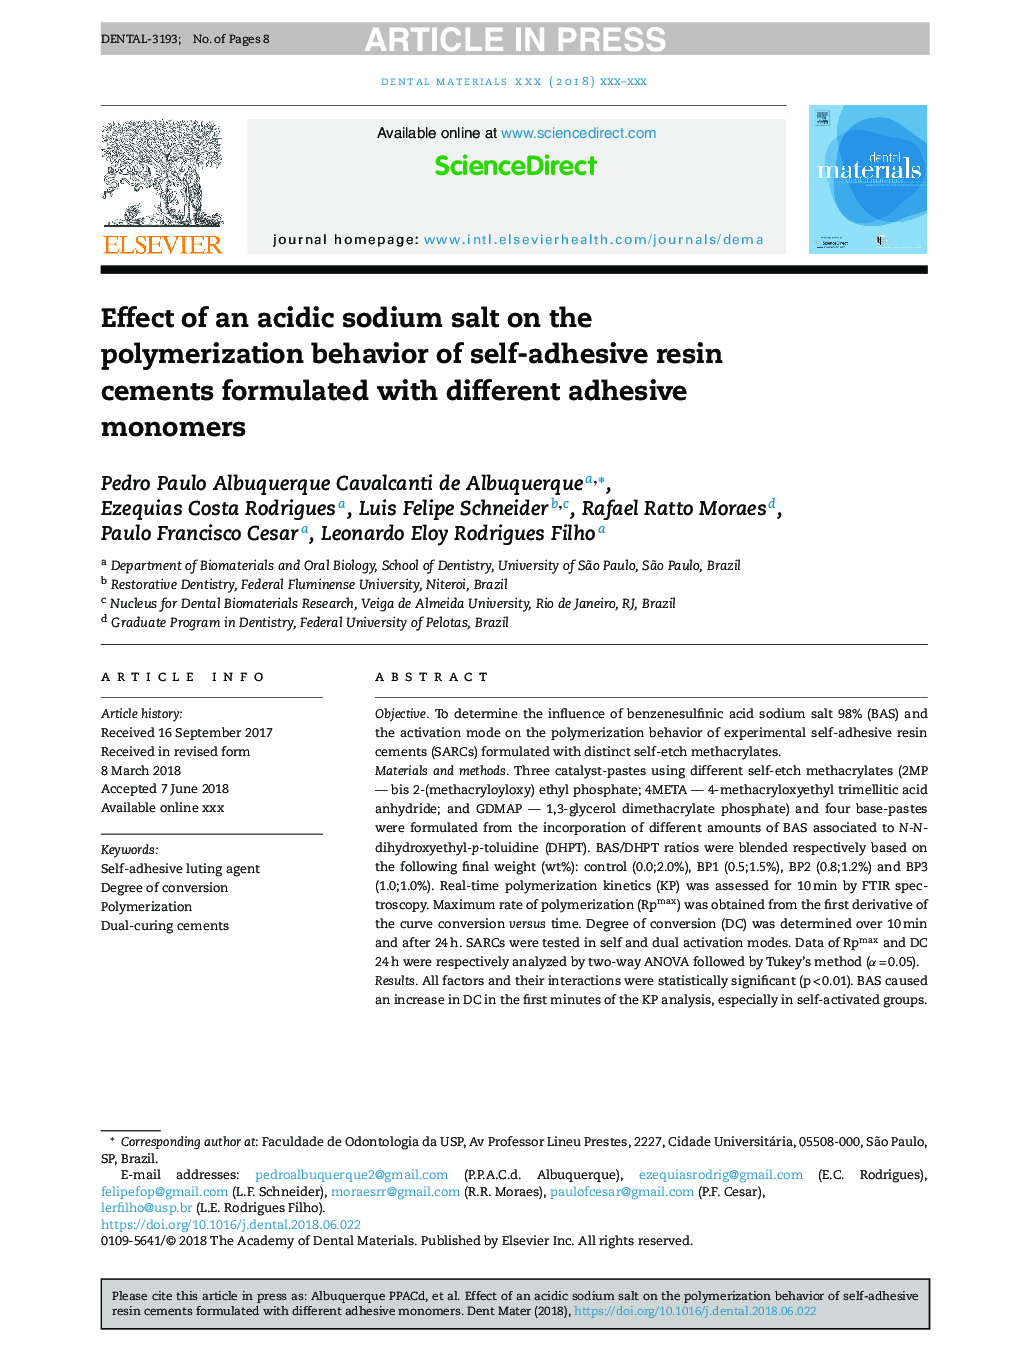 Effect of an acidic sodium salt on the polymerization behavior of self-adhesive resin cements formulated with different adhesive monomers